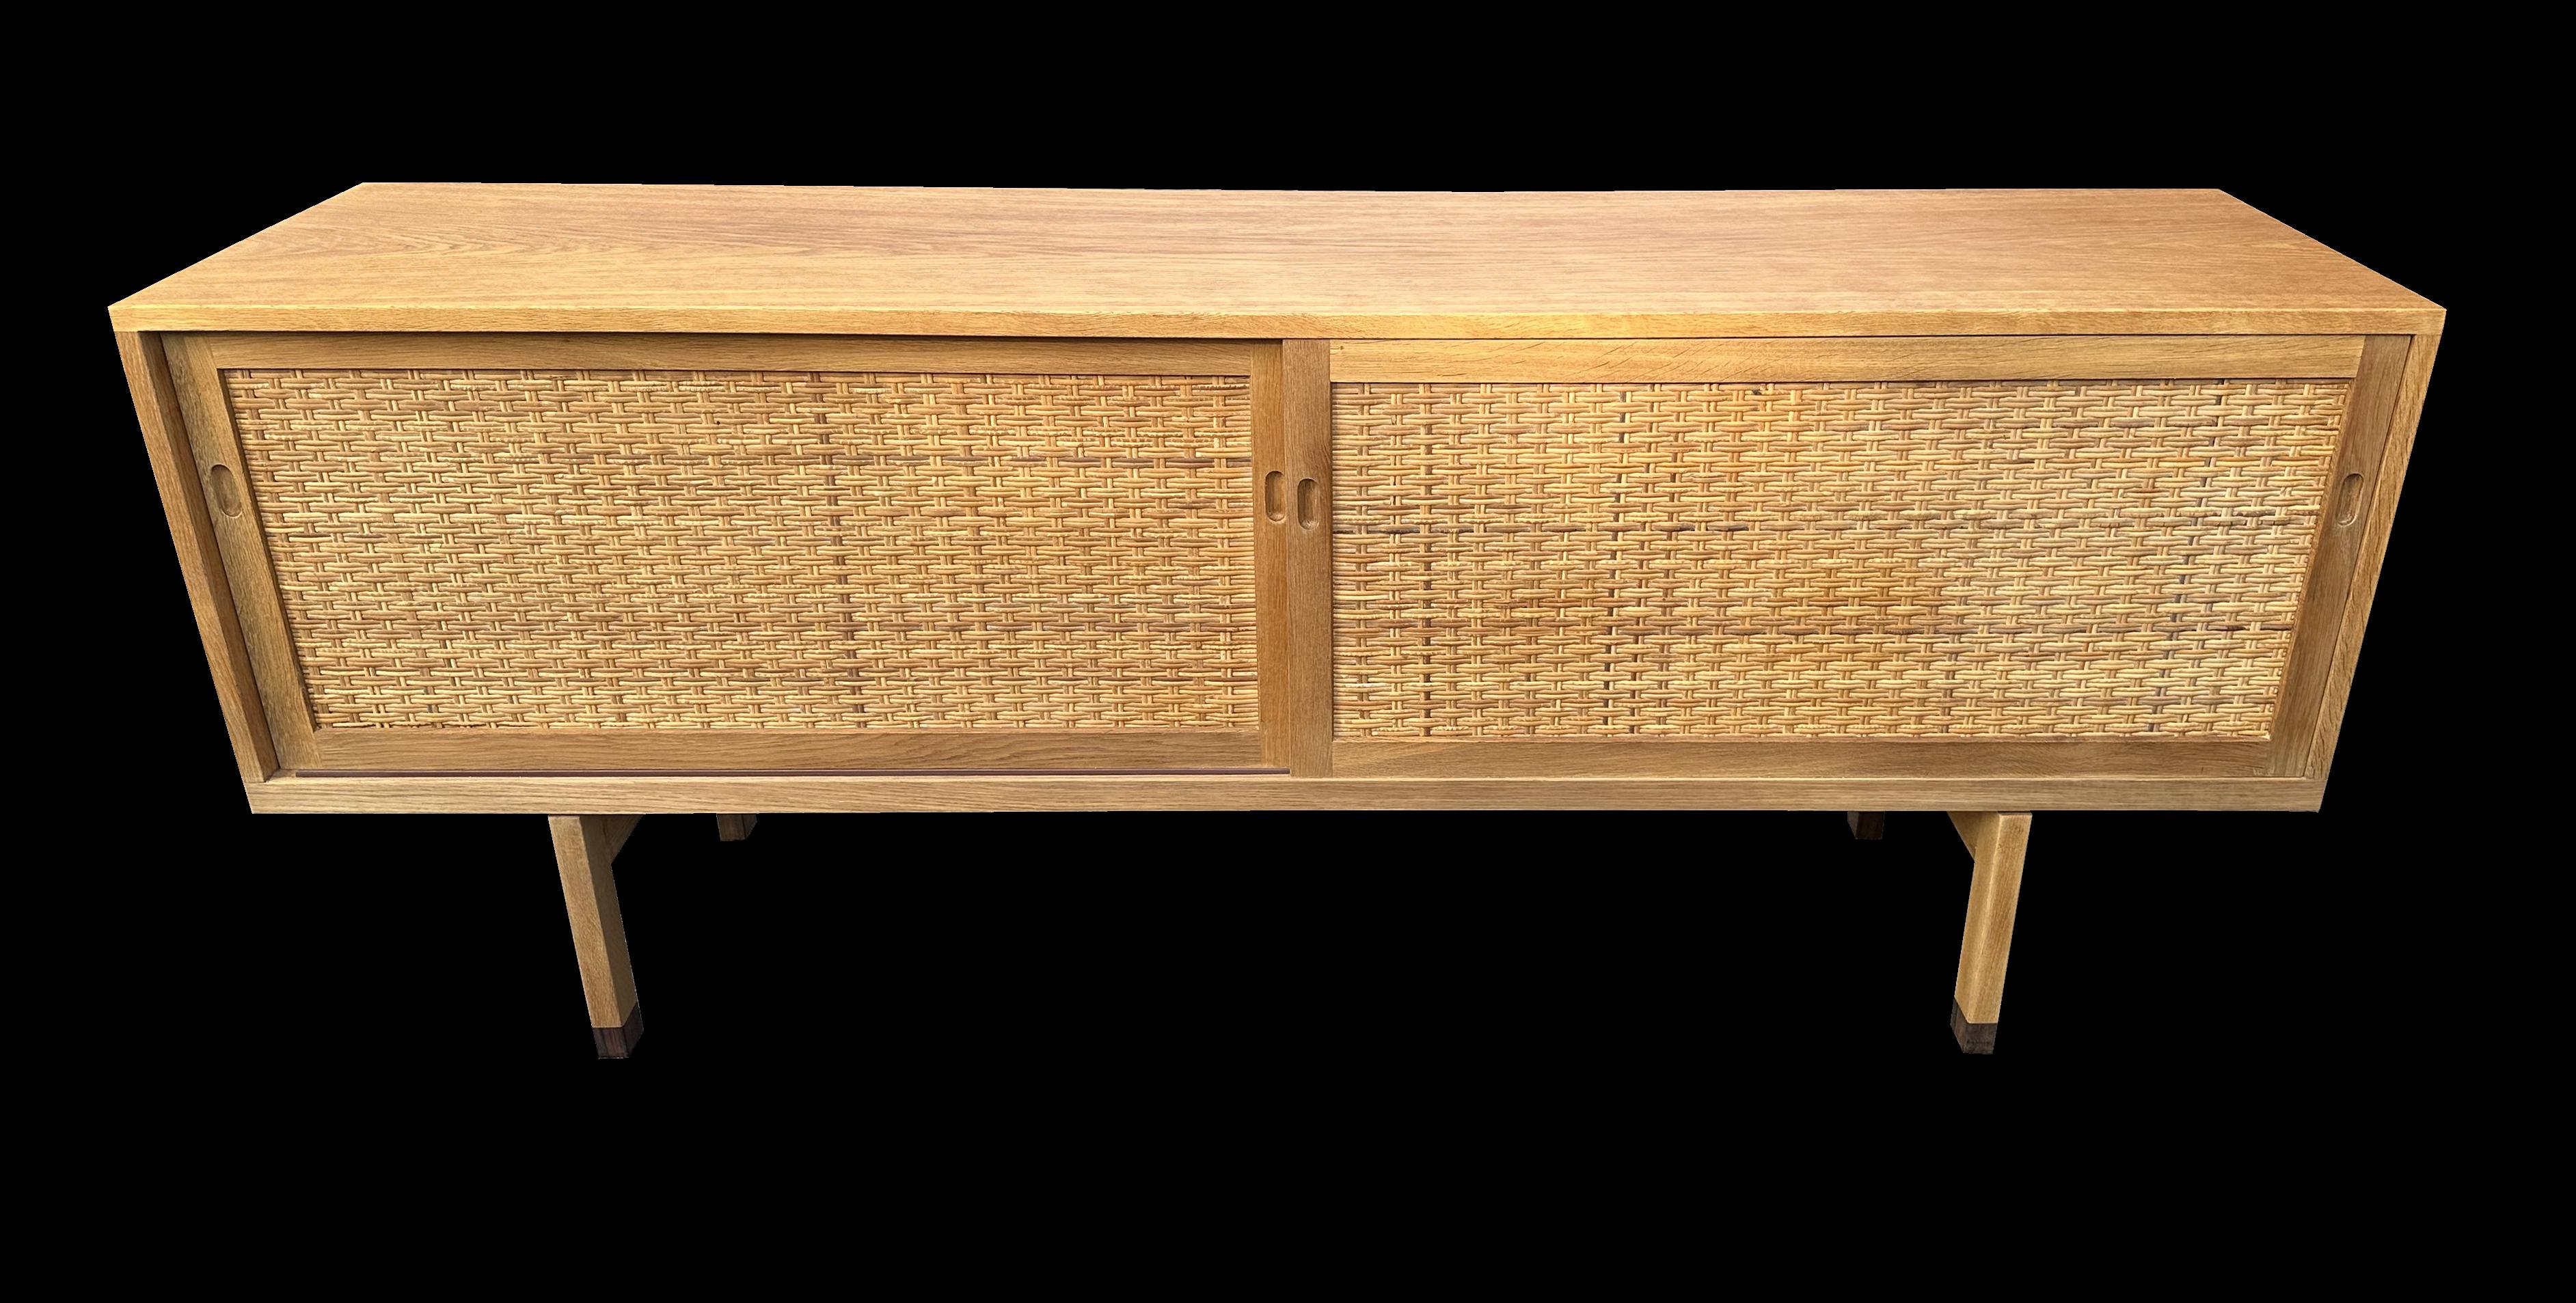 Beautiful Sideboard in Pale Oak with Rattan doors by Hans J Wegner for Ry Mobler, supplied by Johannes Hansen, in fantastic original condition.